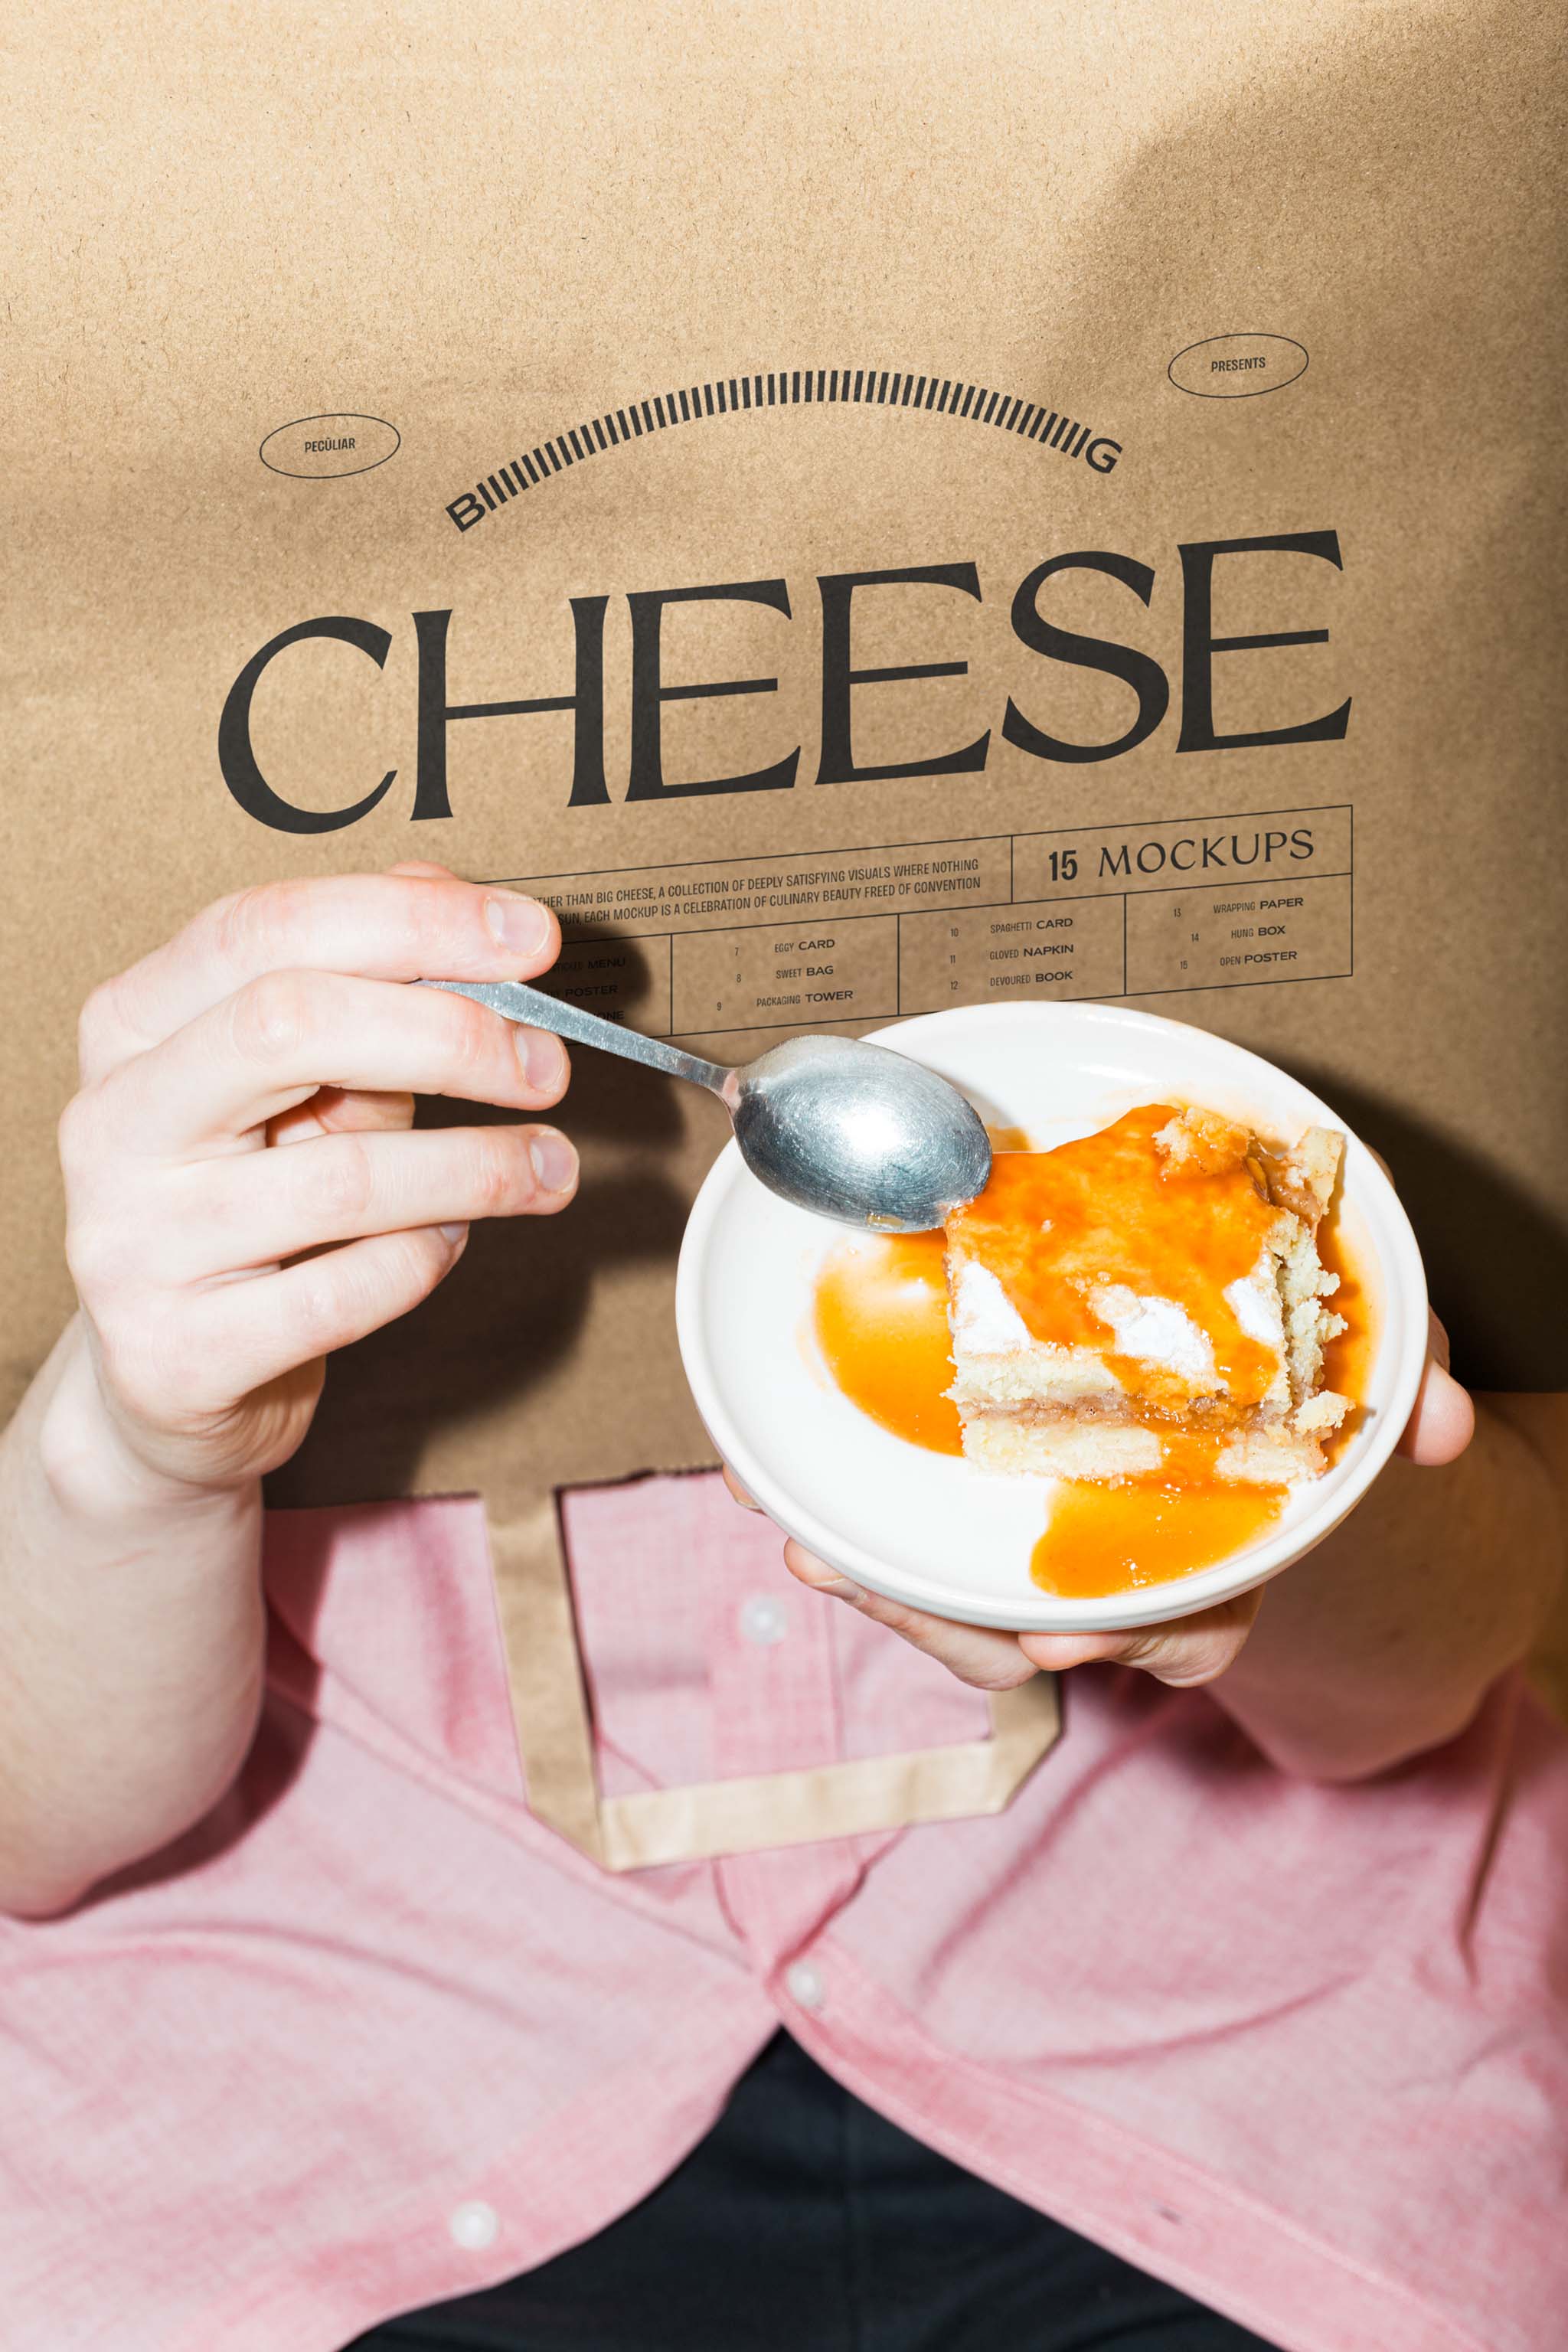 Close-up photo of paper bag mockup turned upside-down over a person's head while they're holding up a sweet orange dessert in a pink dress shirt and black pants, in use example.